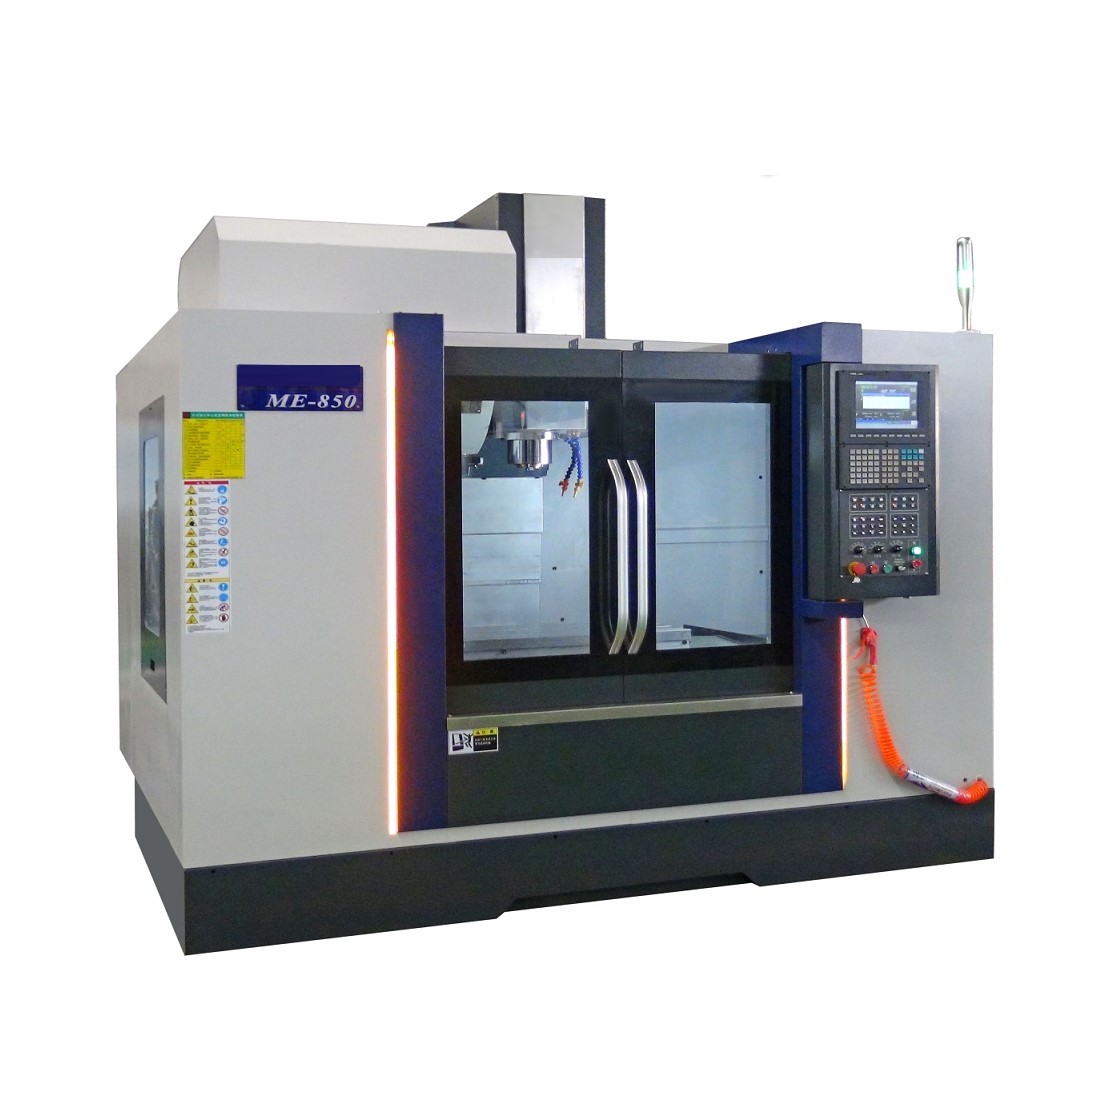 HDME85 vmc850 cnc vertical machining center 4 axis cnc milling machine 5 axis cnc machinery wholesale supplier manufactures